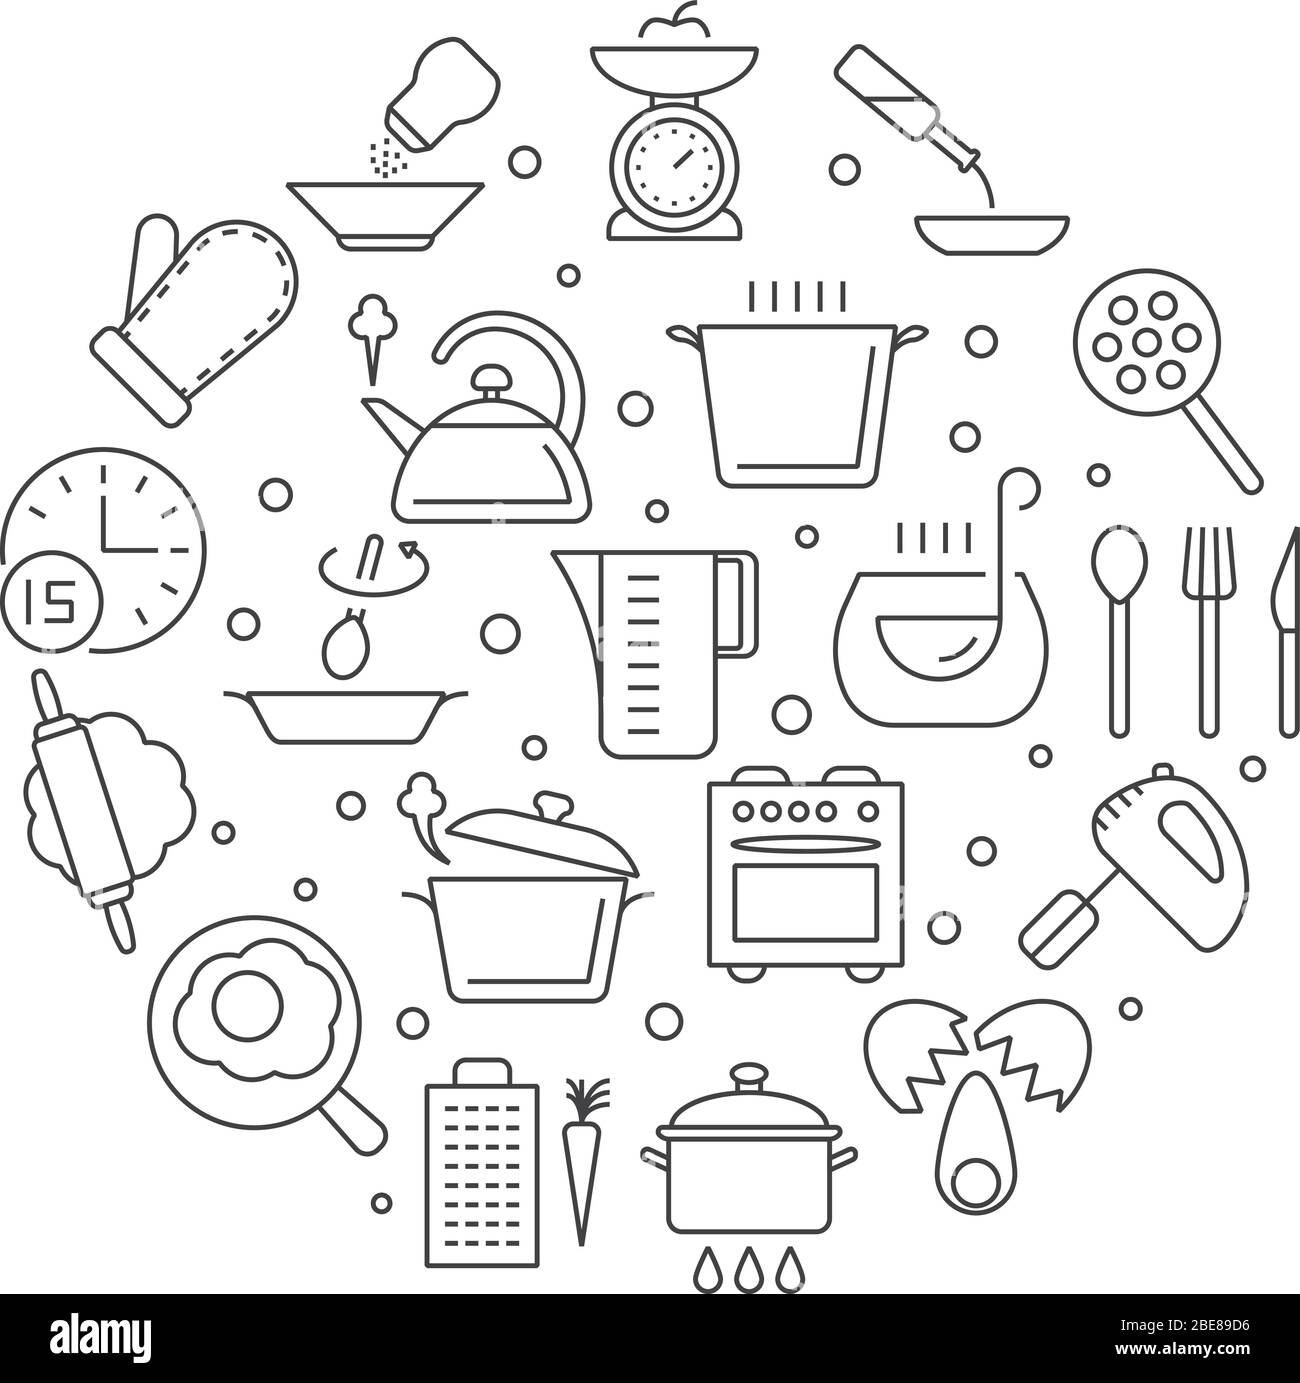 Cooking foods and kitchen tools thin line vector icons. Linear icons scale and fry egg, round form kitchen badge with kettle and blender illustration Stock Vector